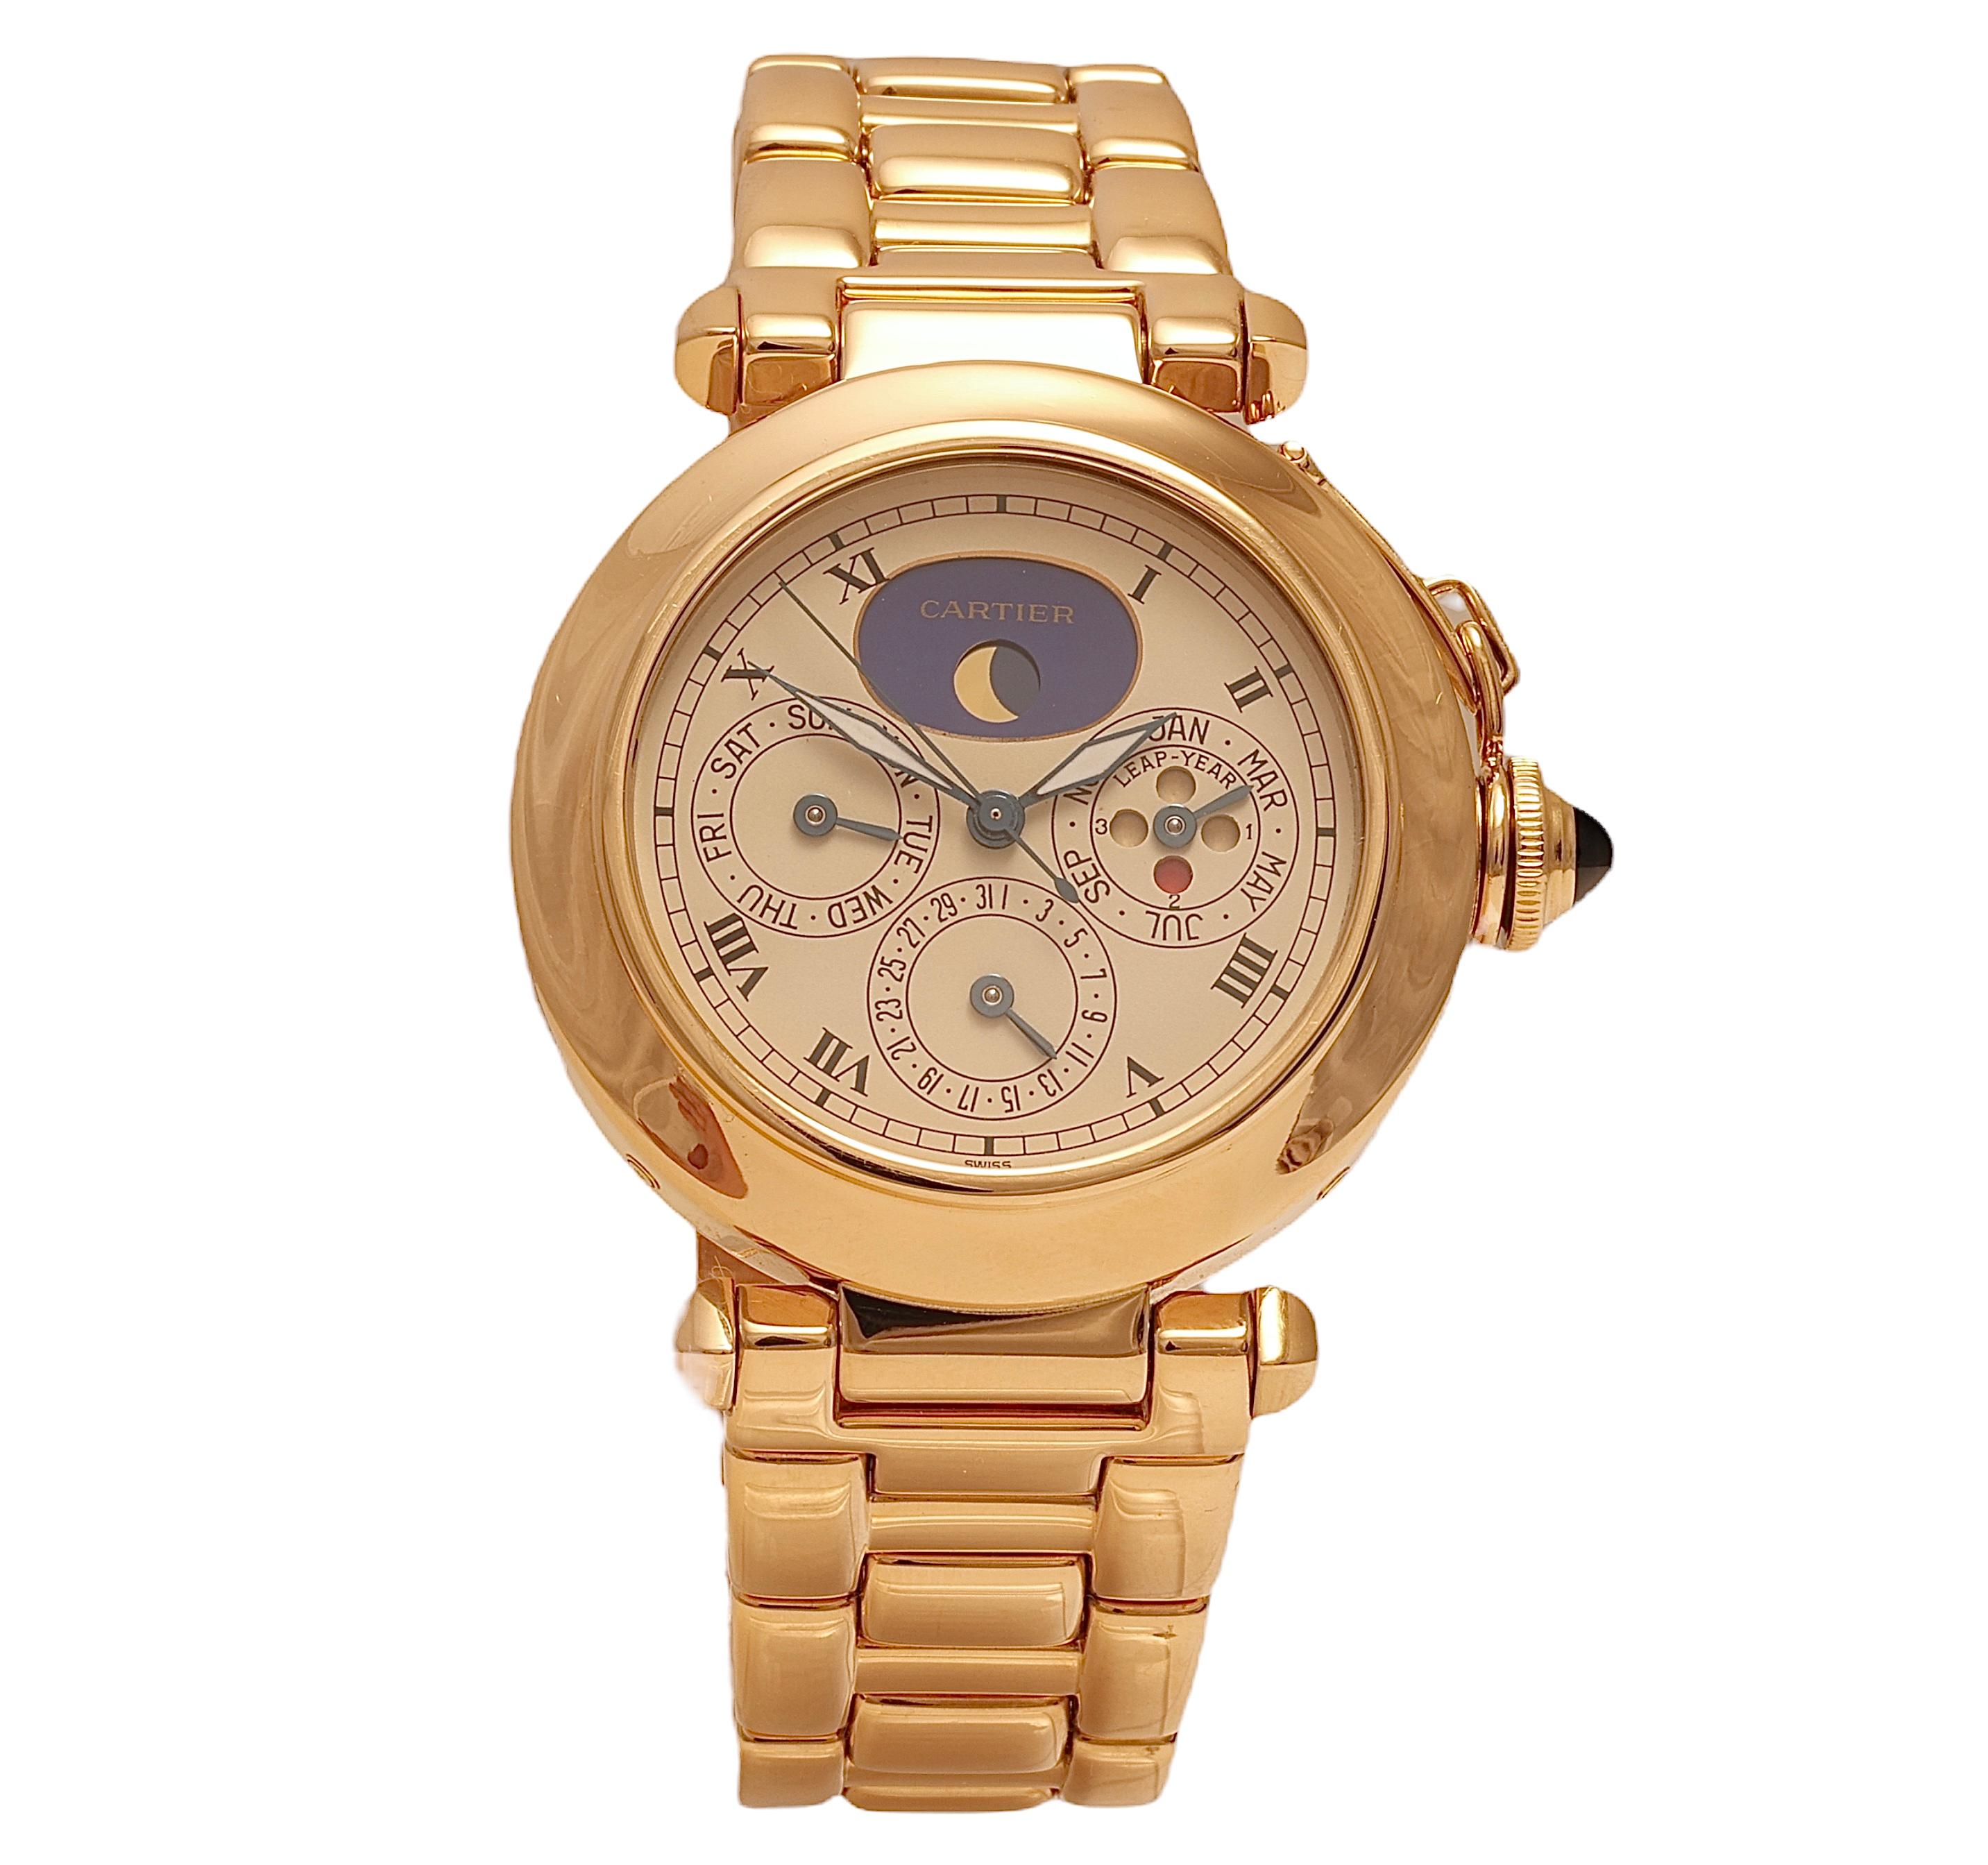 18 Kt Cartier Pasha Perpetual Calendar Wrist Watch, Day Date Month Moon Phase For Sale 4